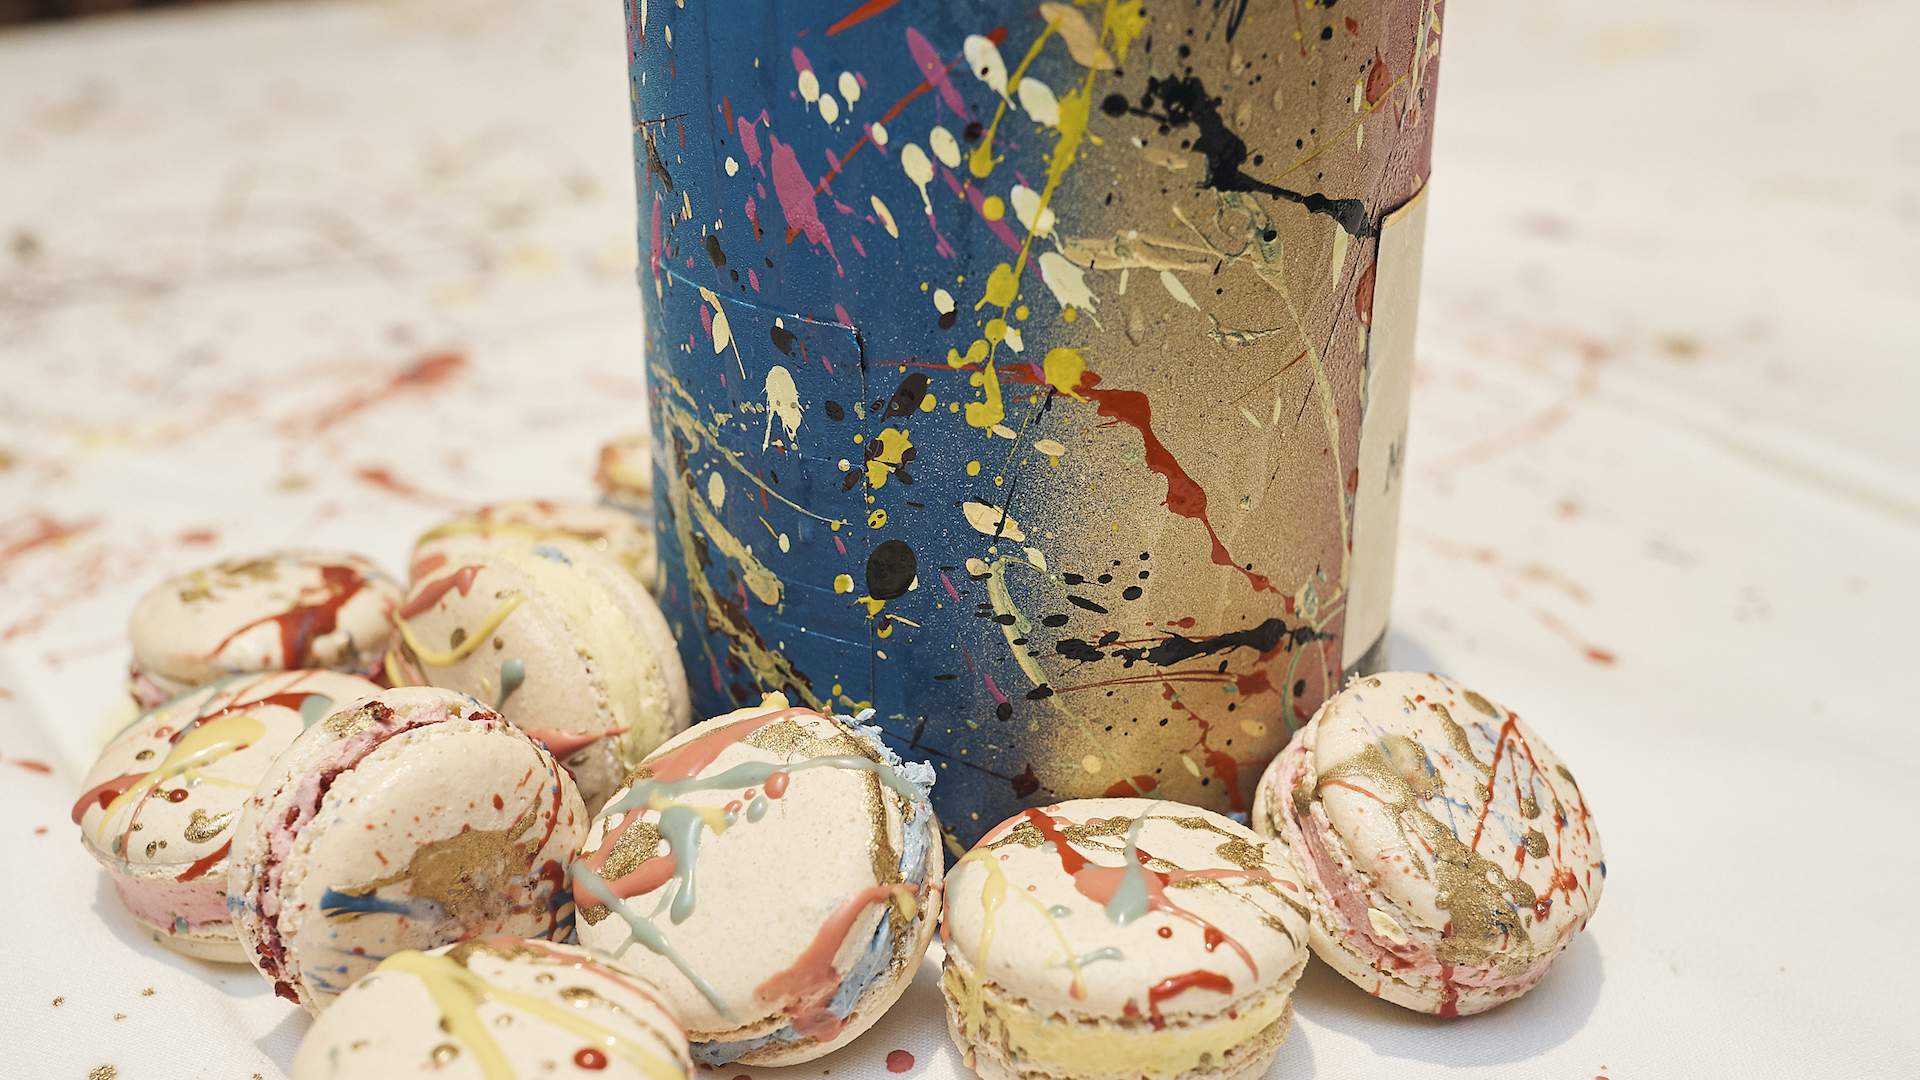 This Art-Inspired High Tea Offers Drip-Painted Macarons and Free Champagne